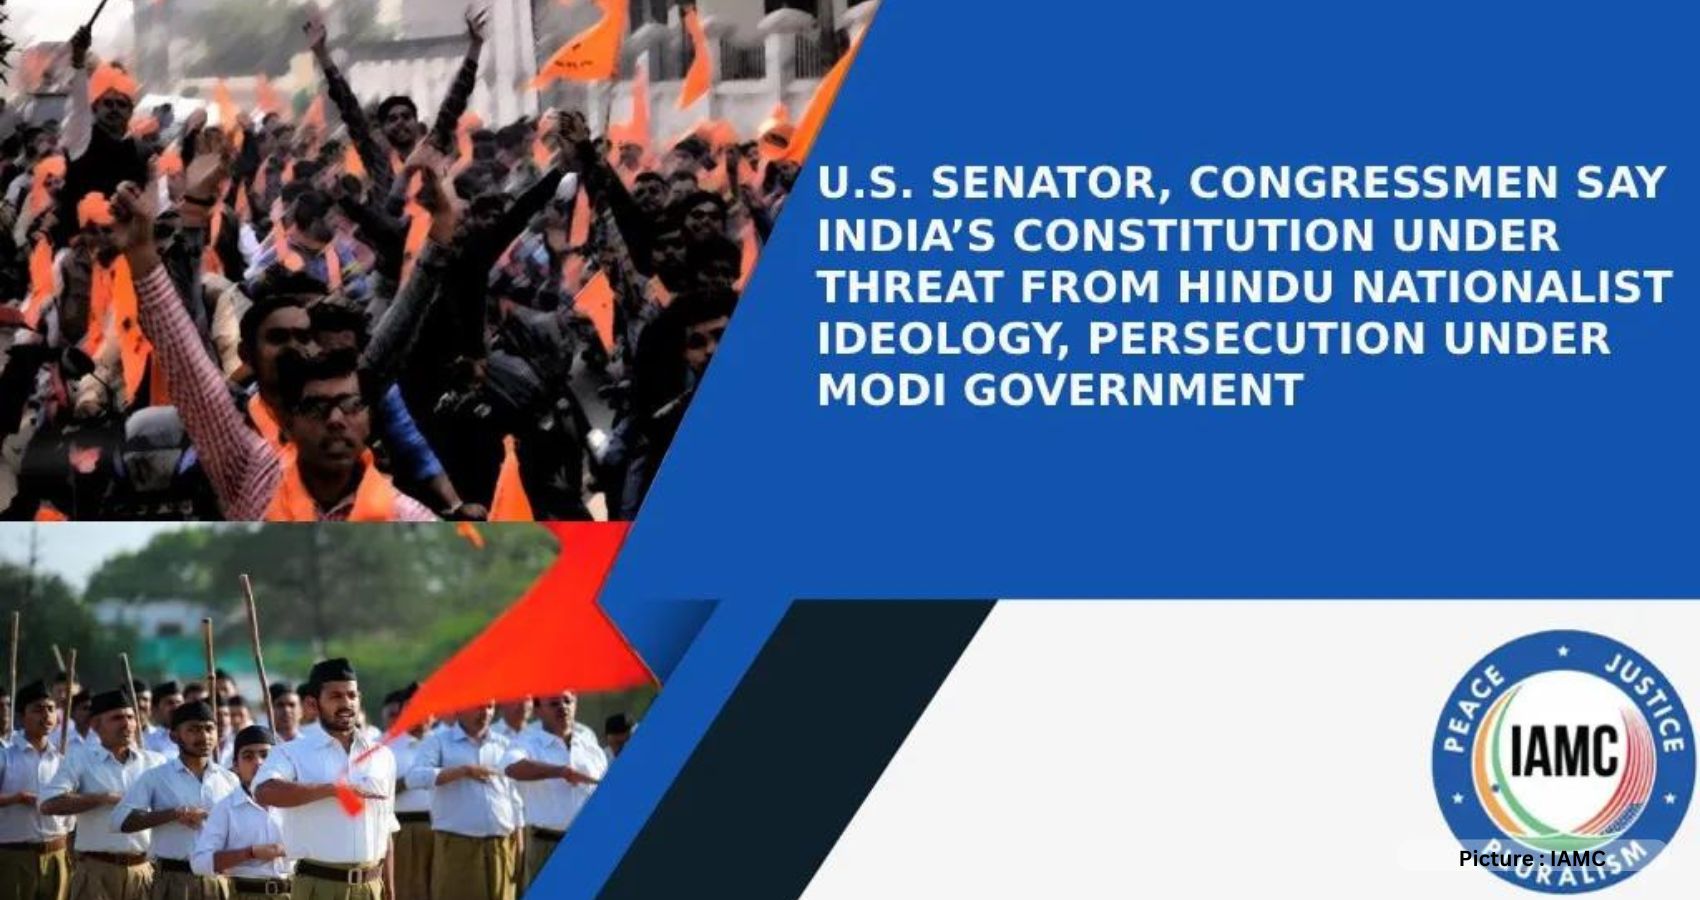 US Silence About Modi Regime’s Persecution Of Minorities Condemned